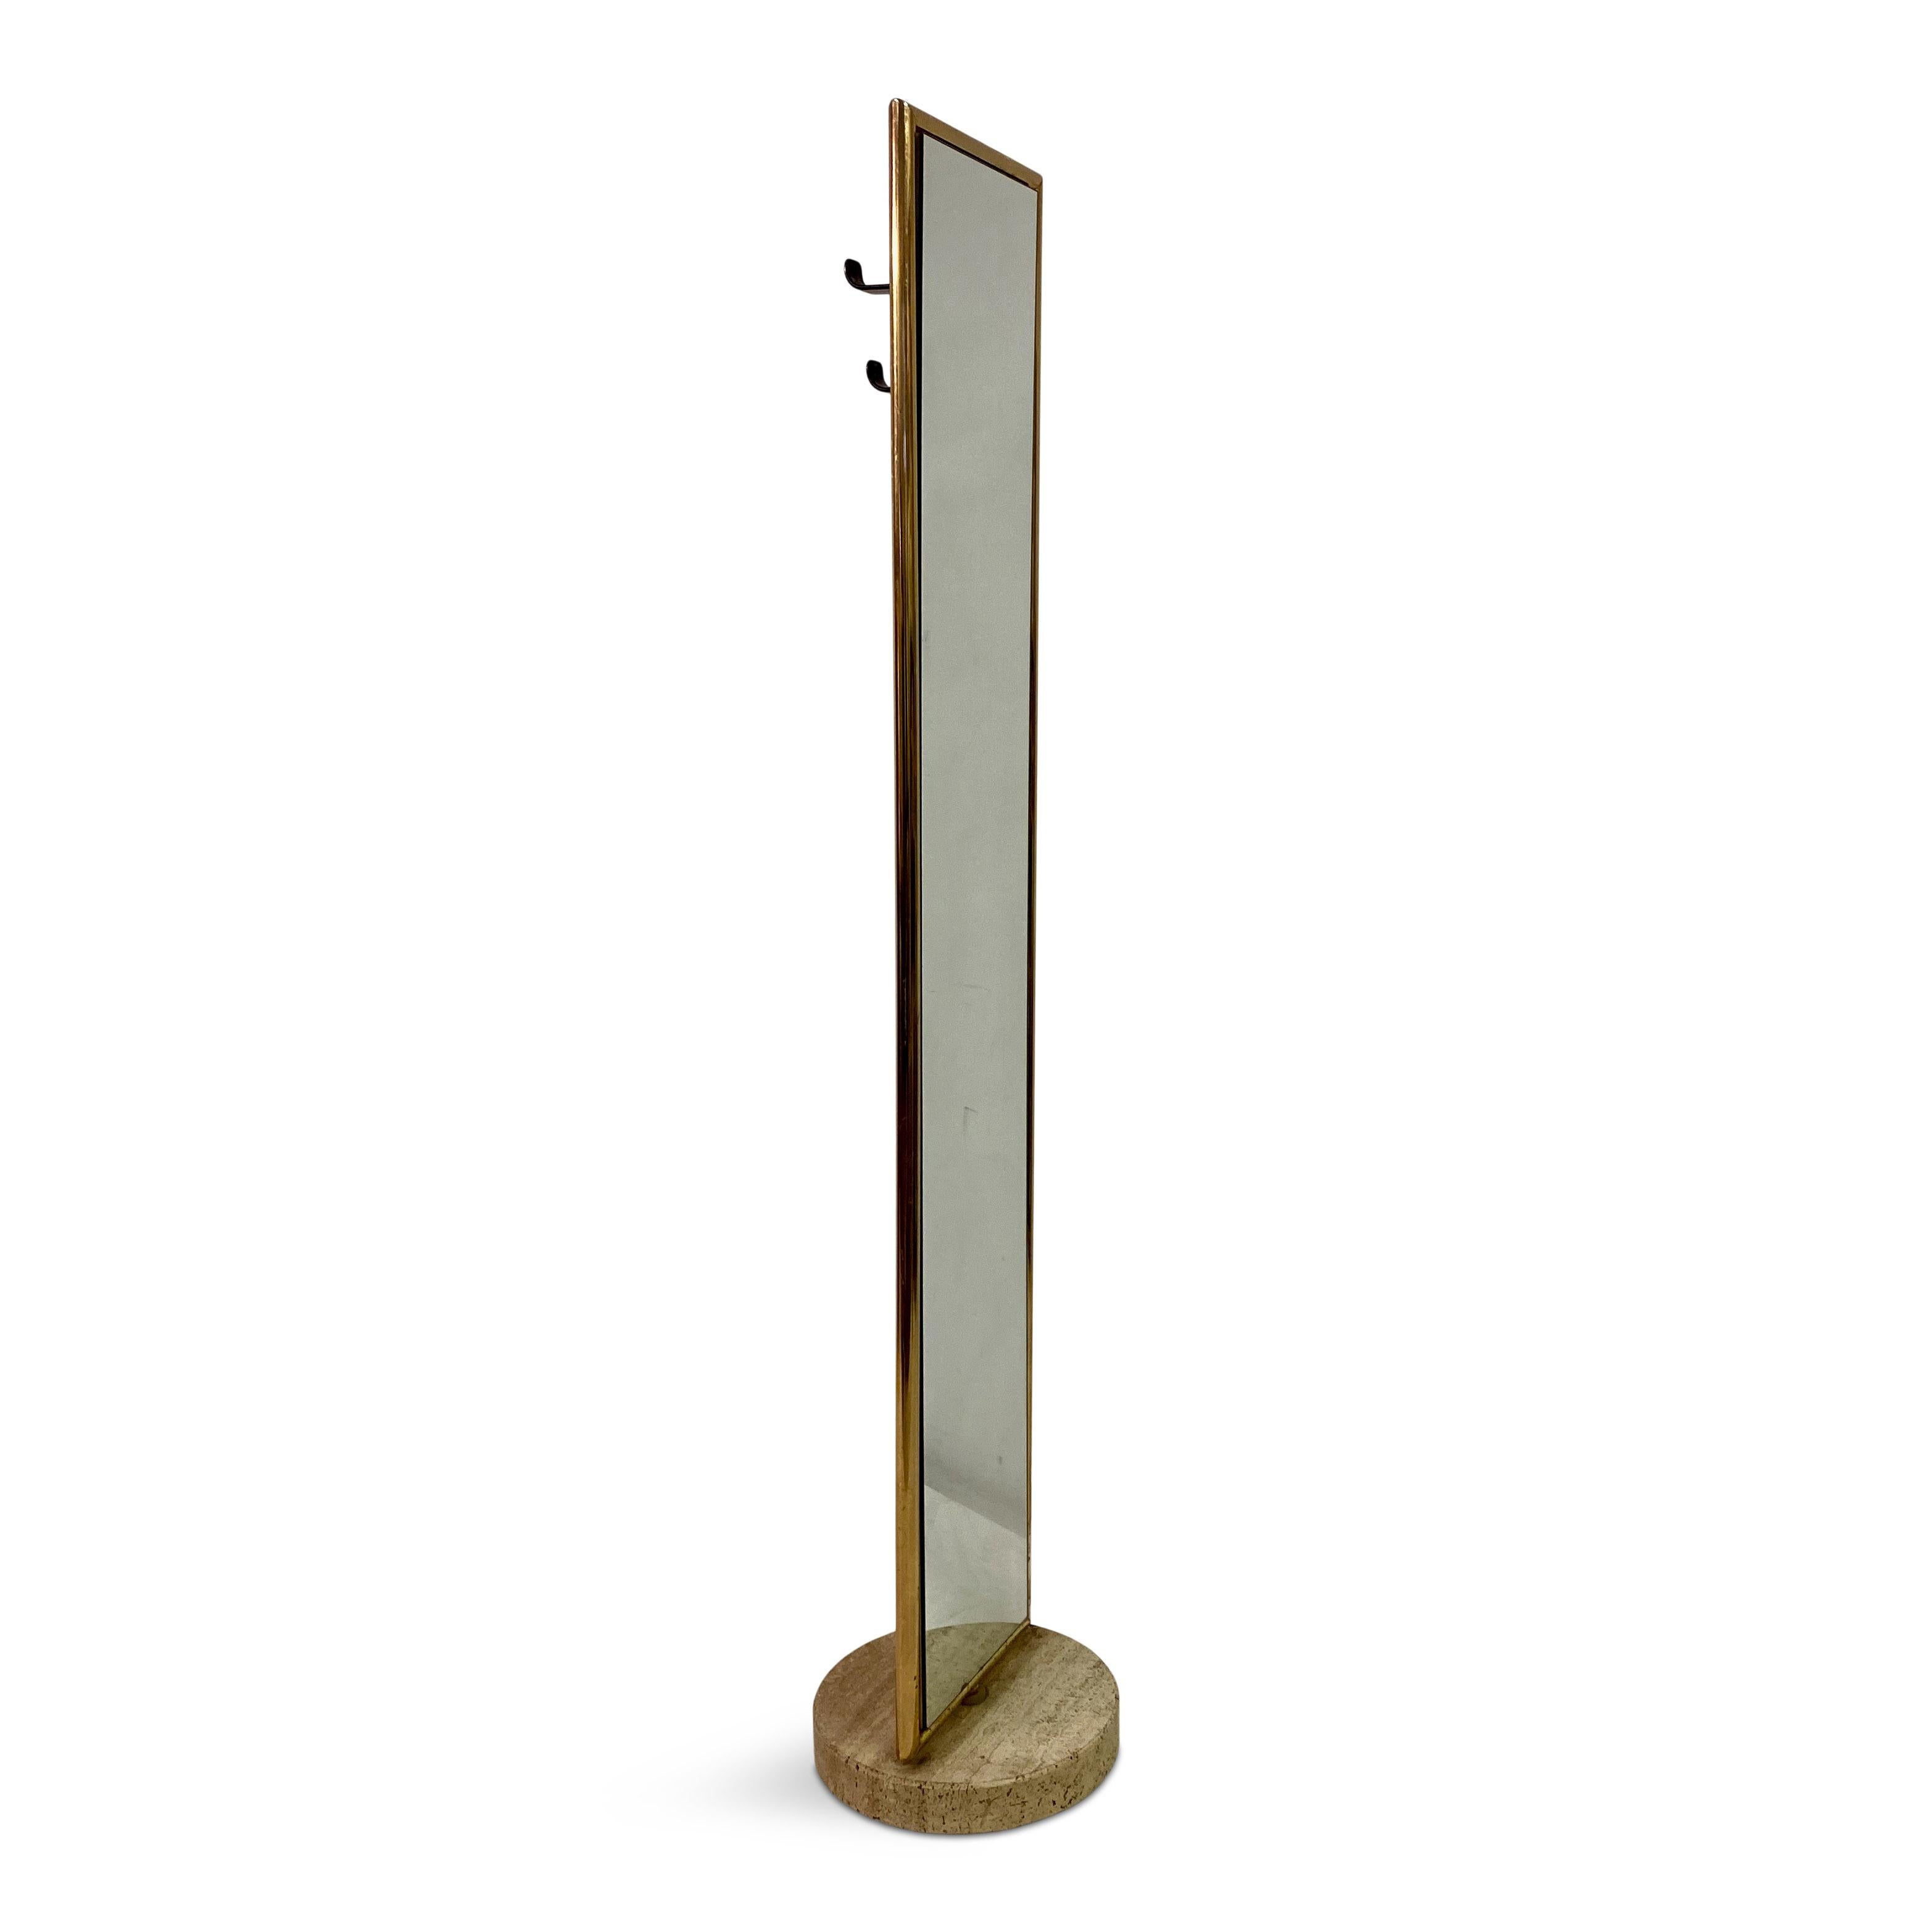 Floor standing mirror

Brass frame

Circular travertine base

Two clothes hooks on the back

Italy 1970s/1980s.